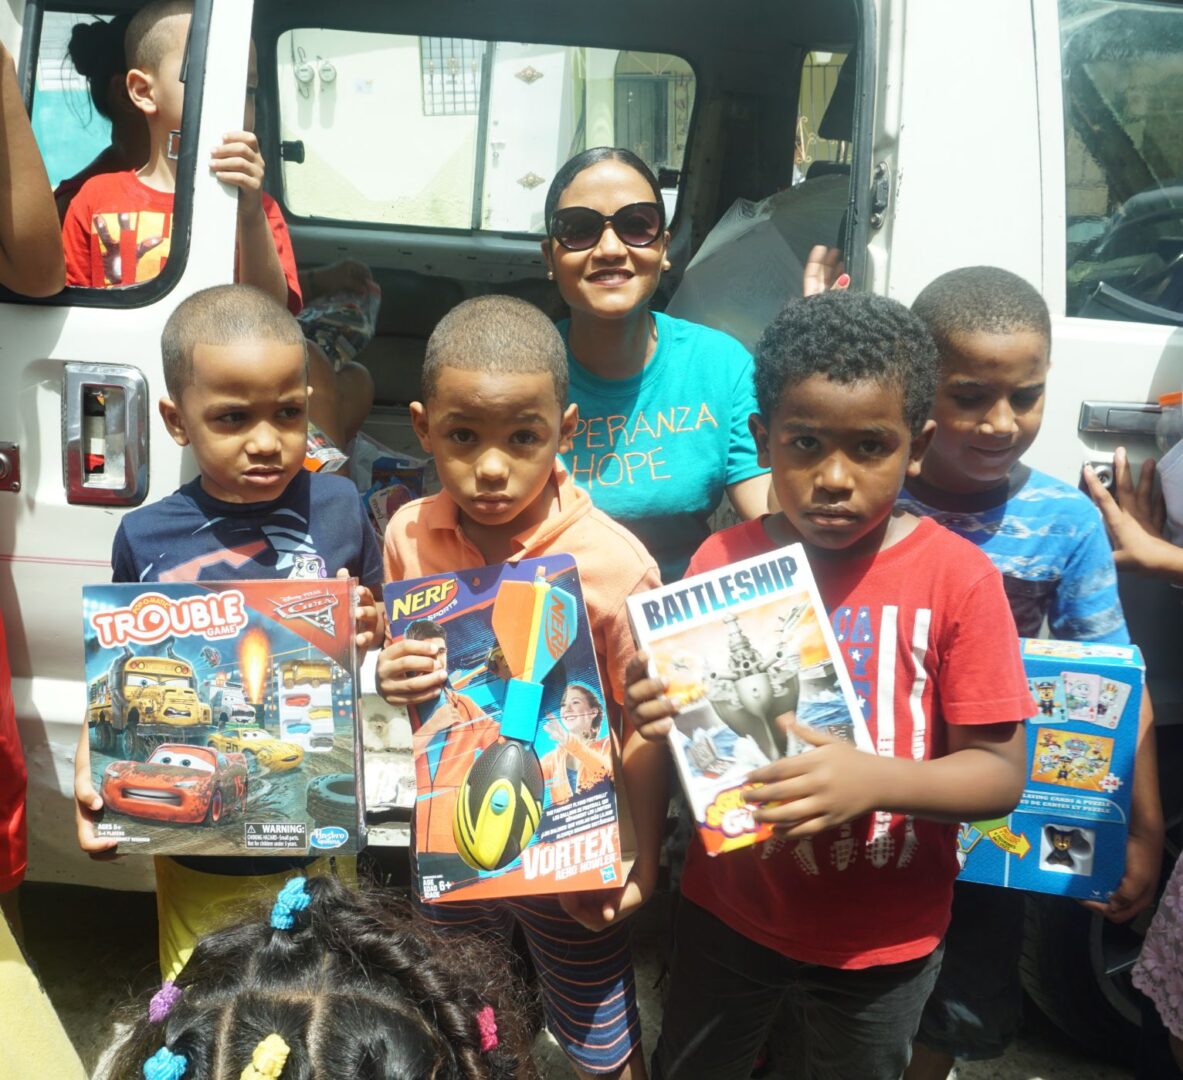 Four little boys holding toys and a staff in blue shirt in front of a vehicle with an opened door